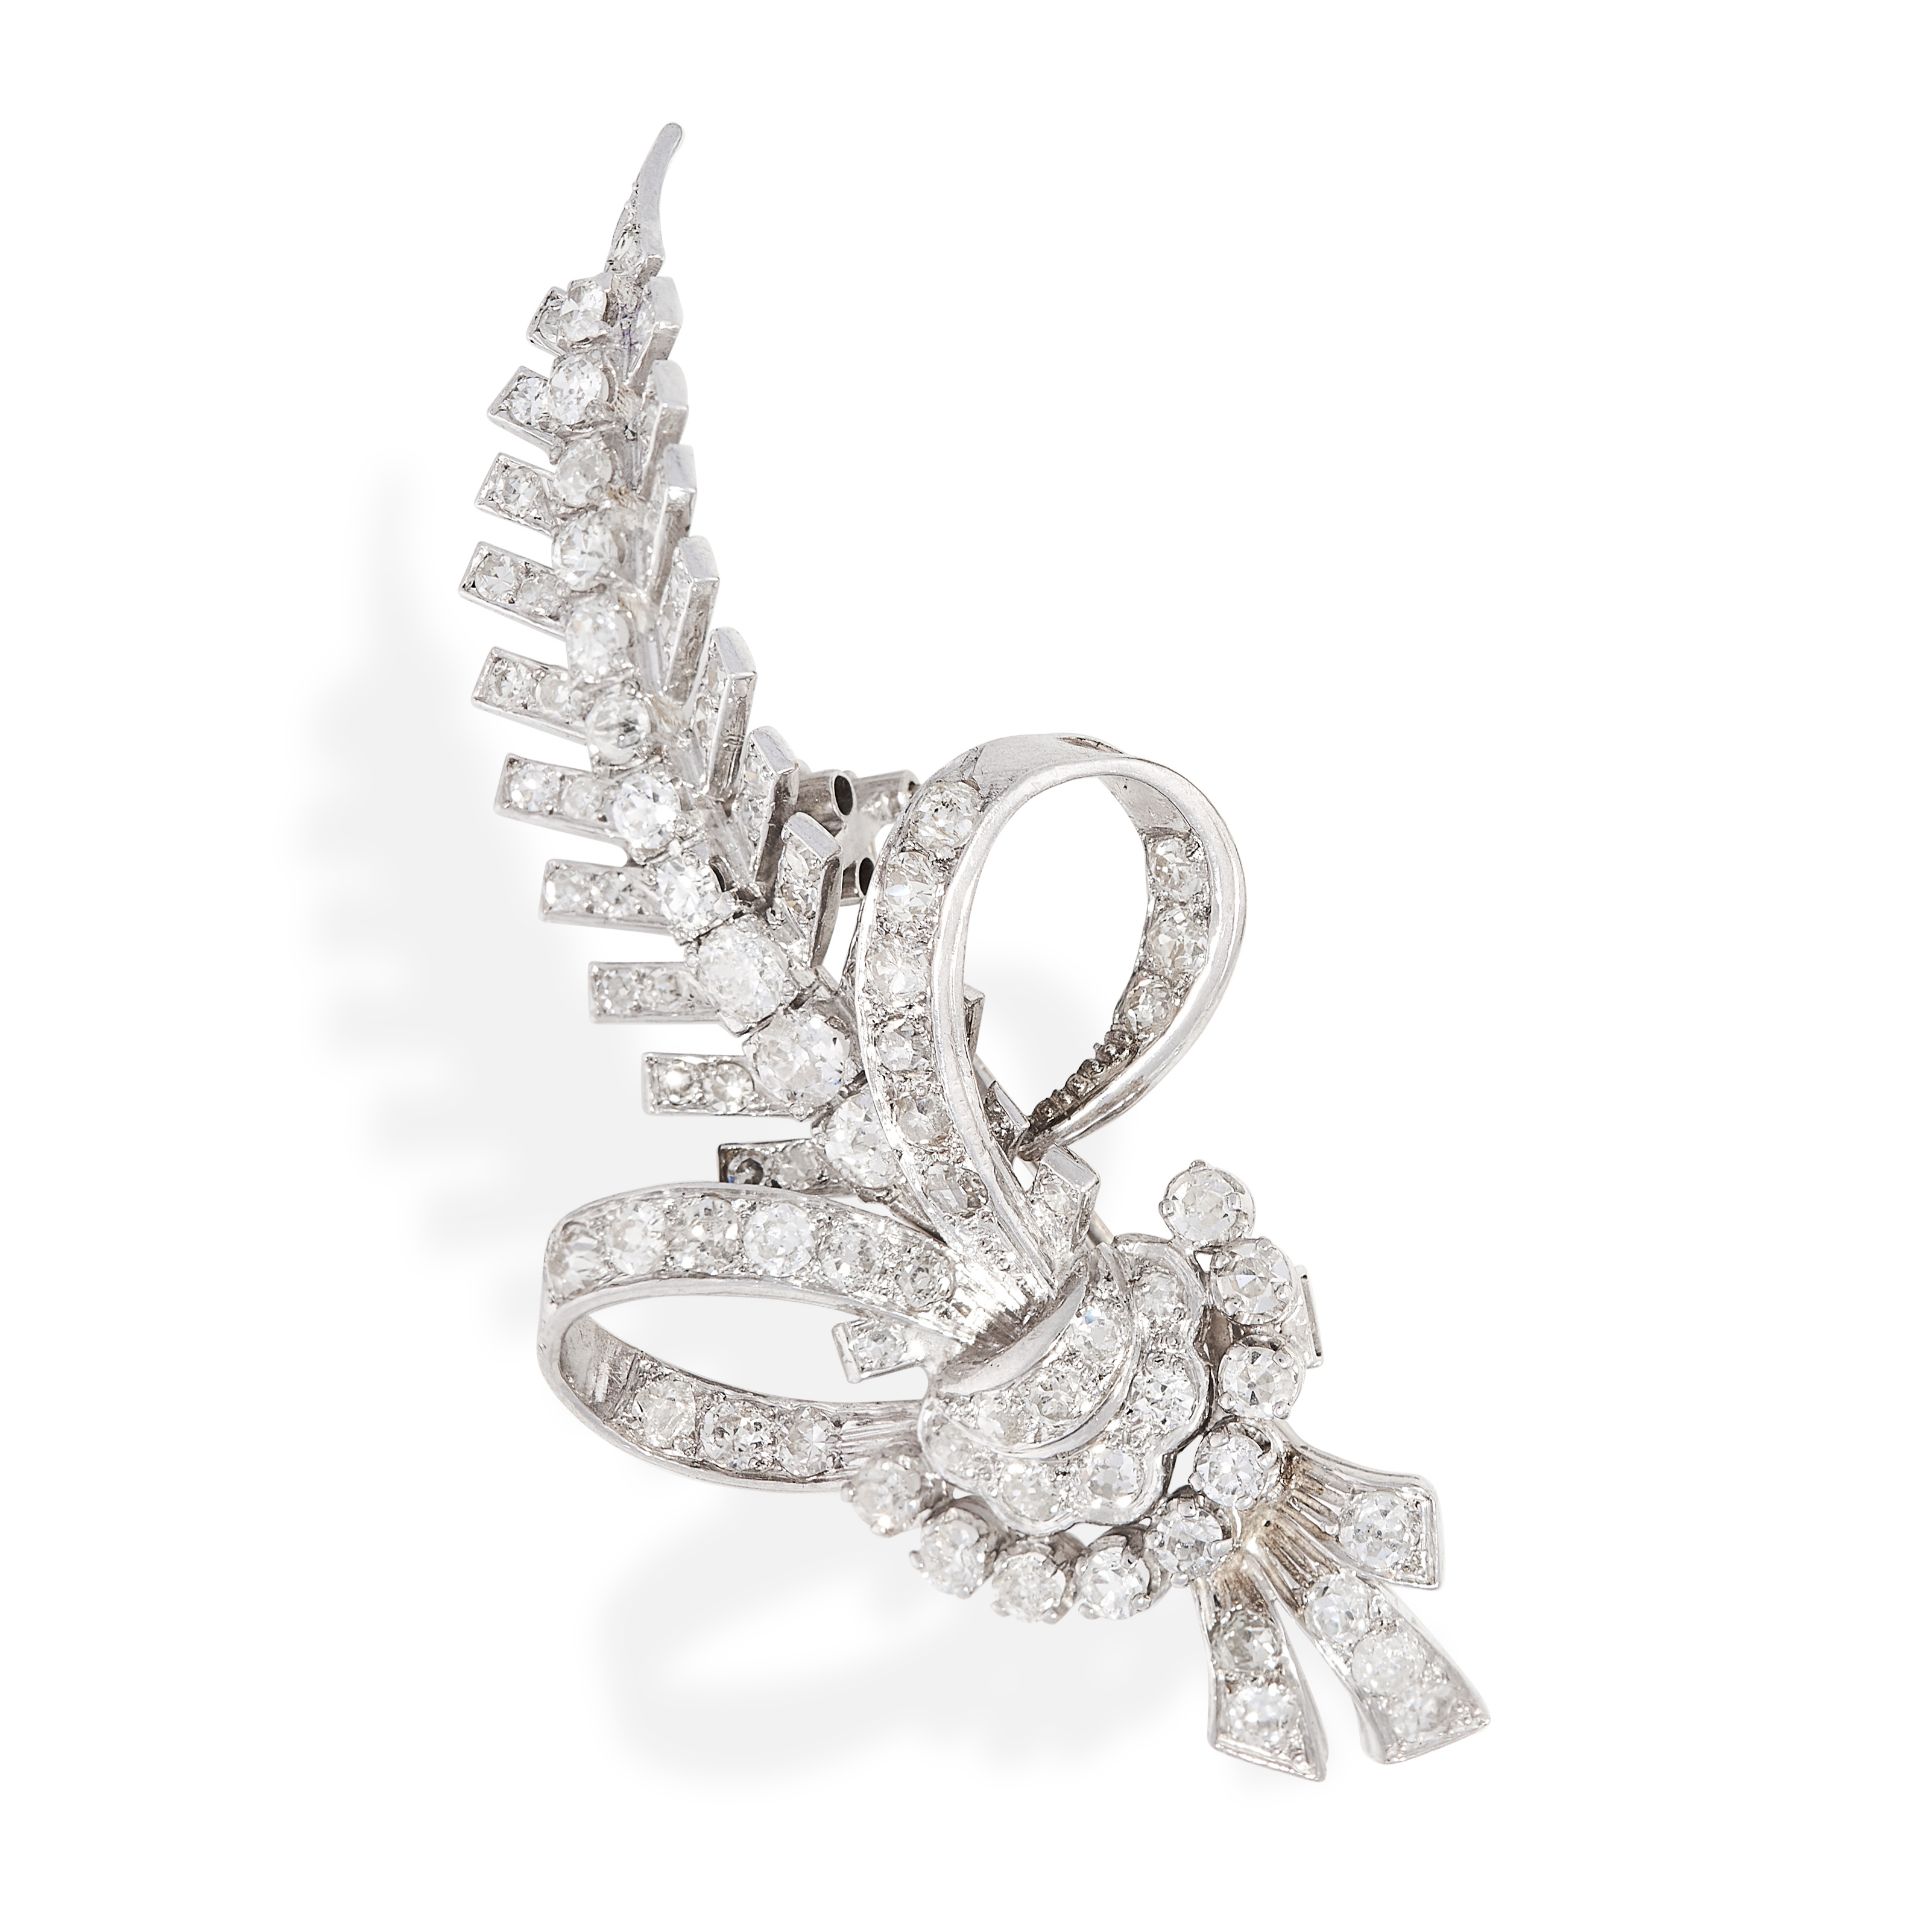 A VINTAGE DIAMOND BROOCH, CIRCA 1950 in 18ct white gold, designed as a spray of foliage tied with